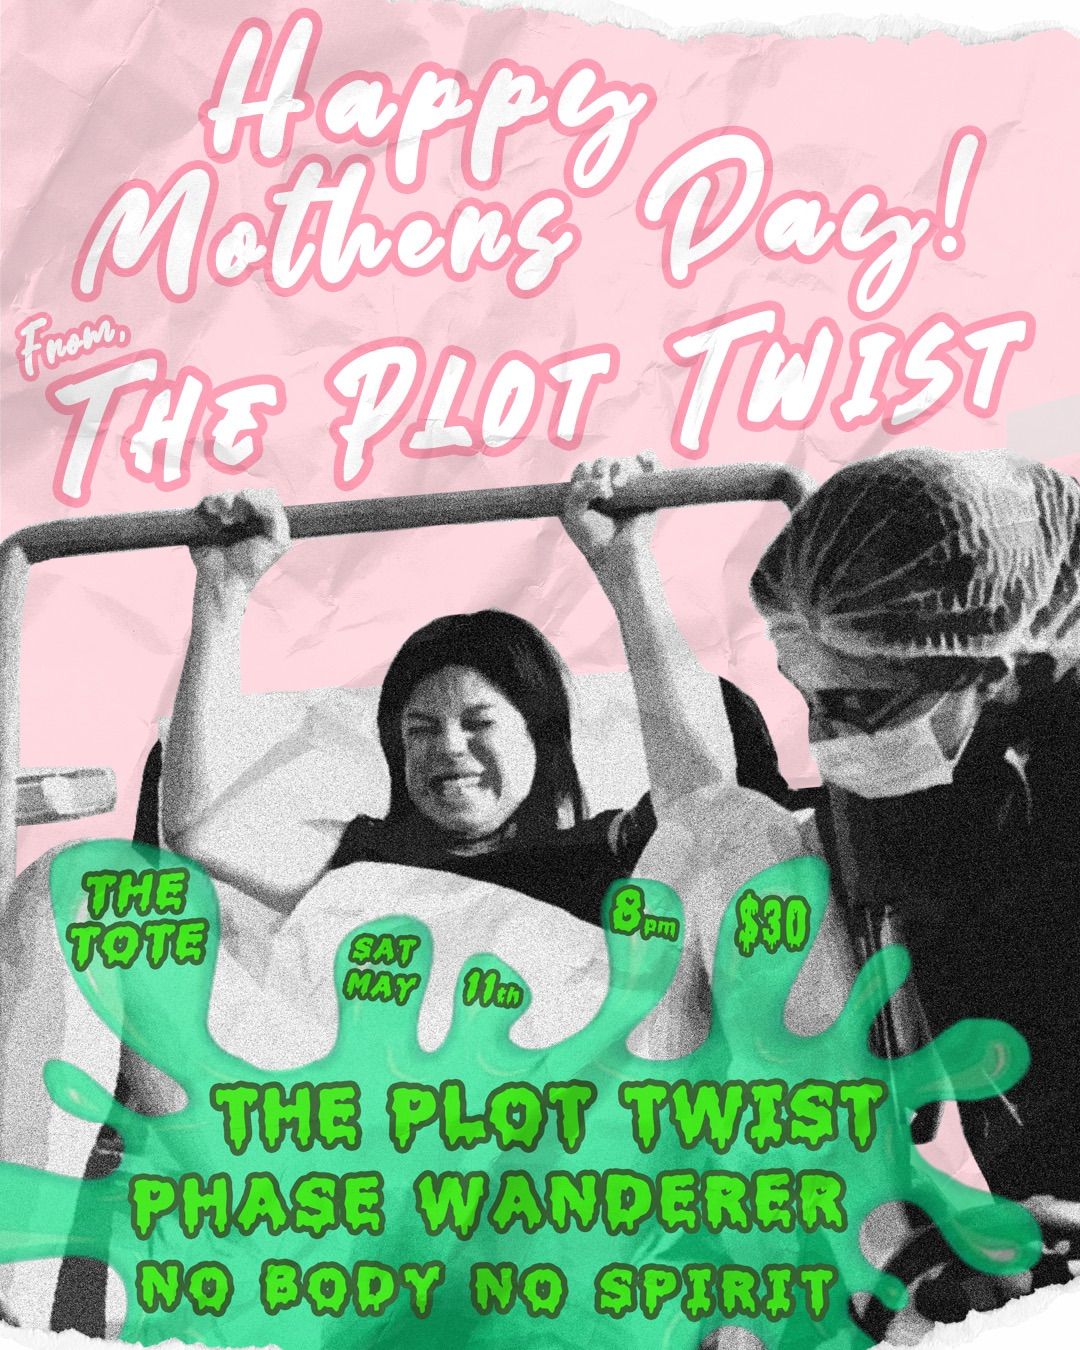 HAPPY MOTHERS DAY! From, THE PLOT TWIST